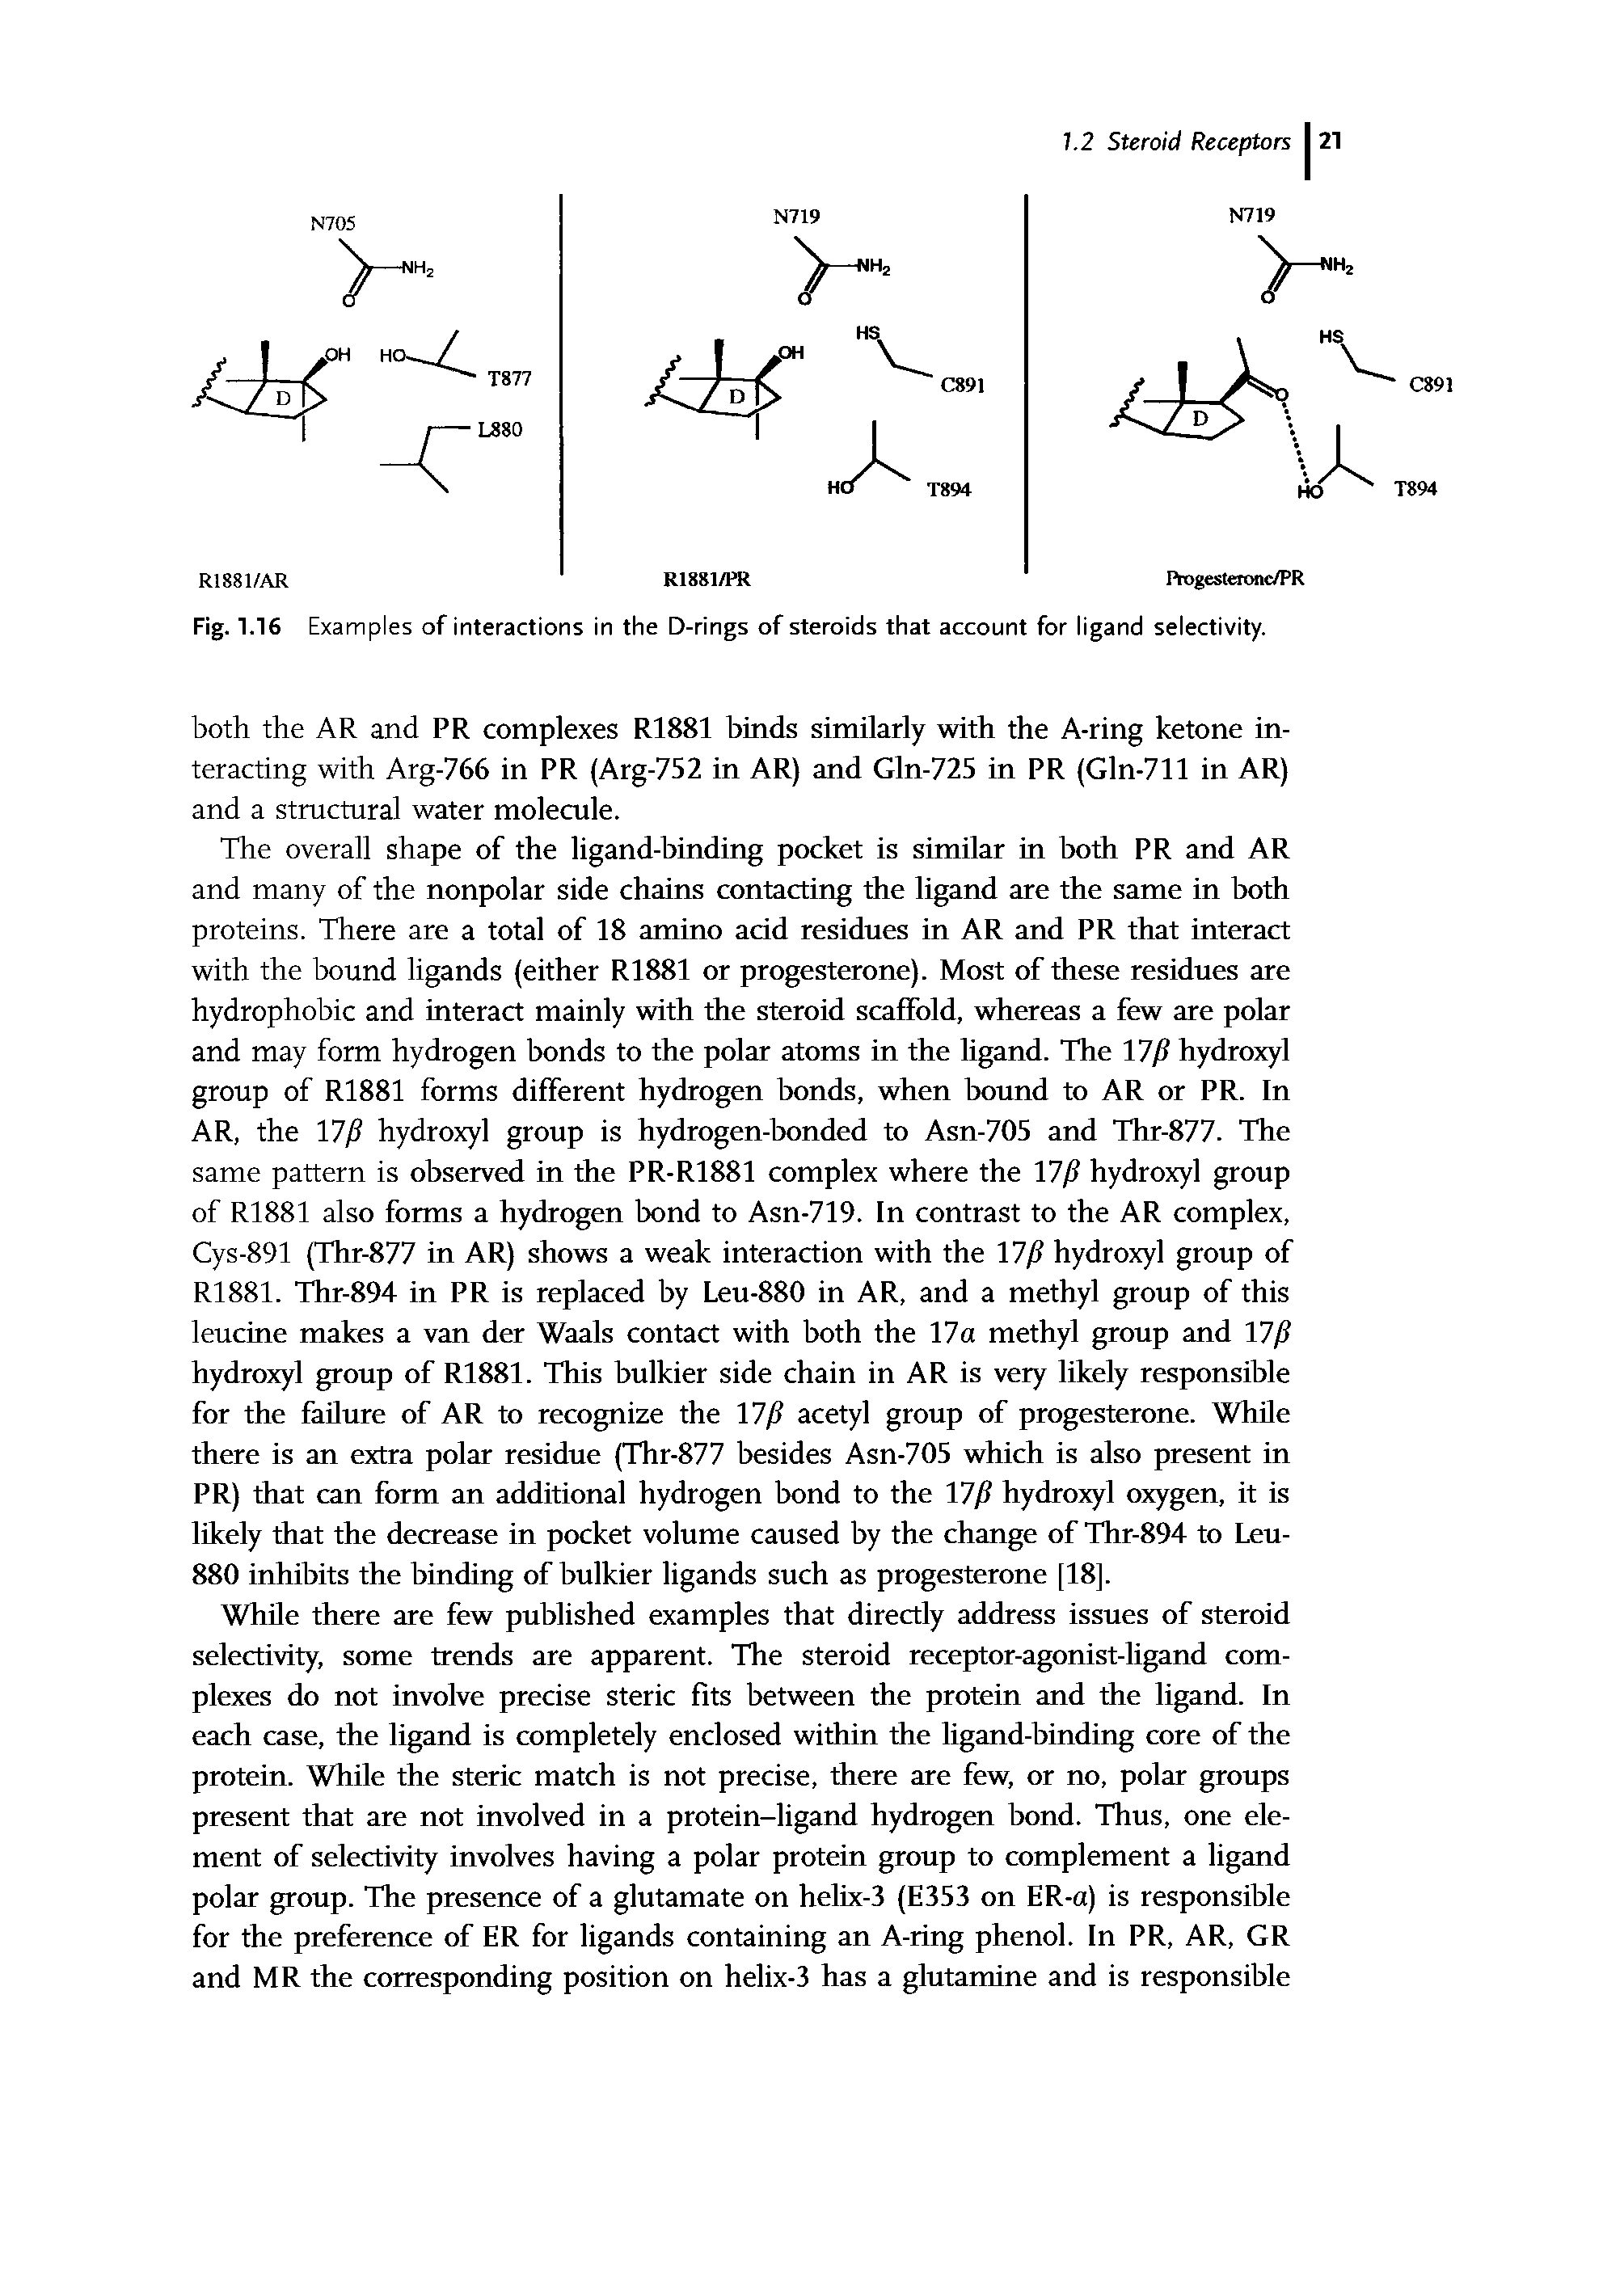 Fig. 1.16 Examples of interactions in the D-rings of steroids that account for ligand selectivity.